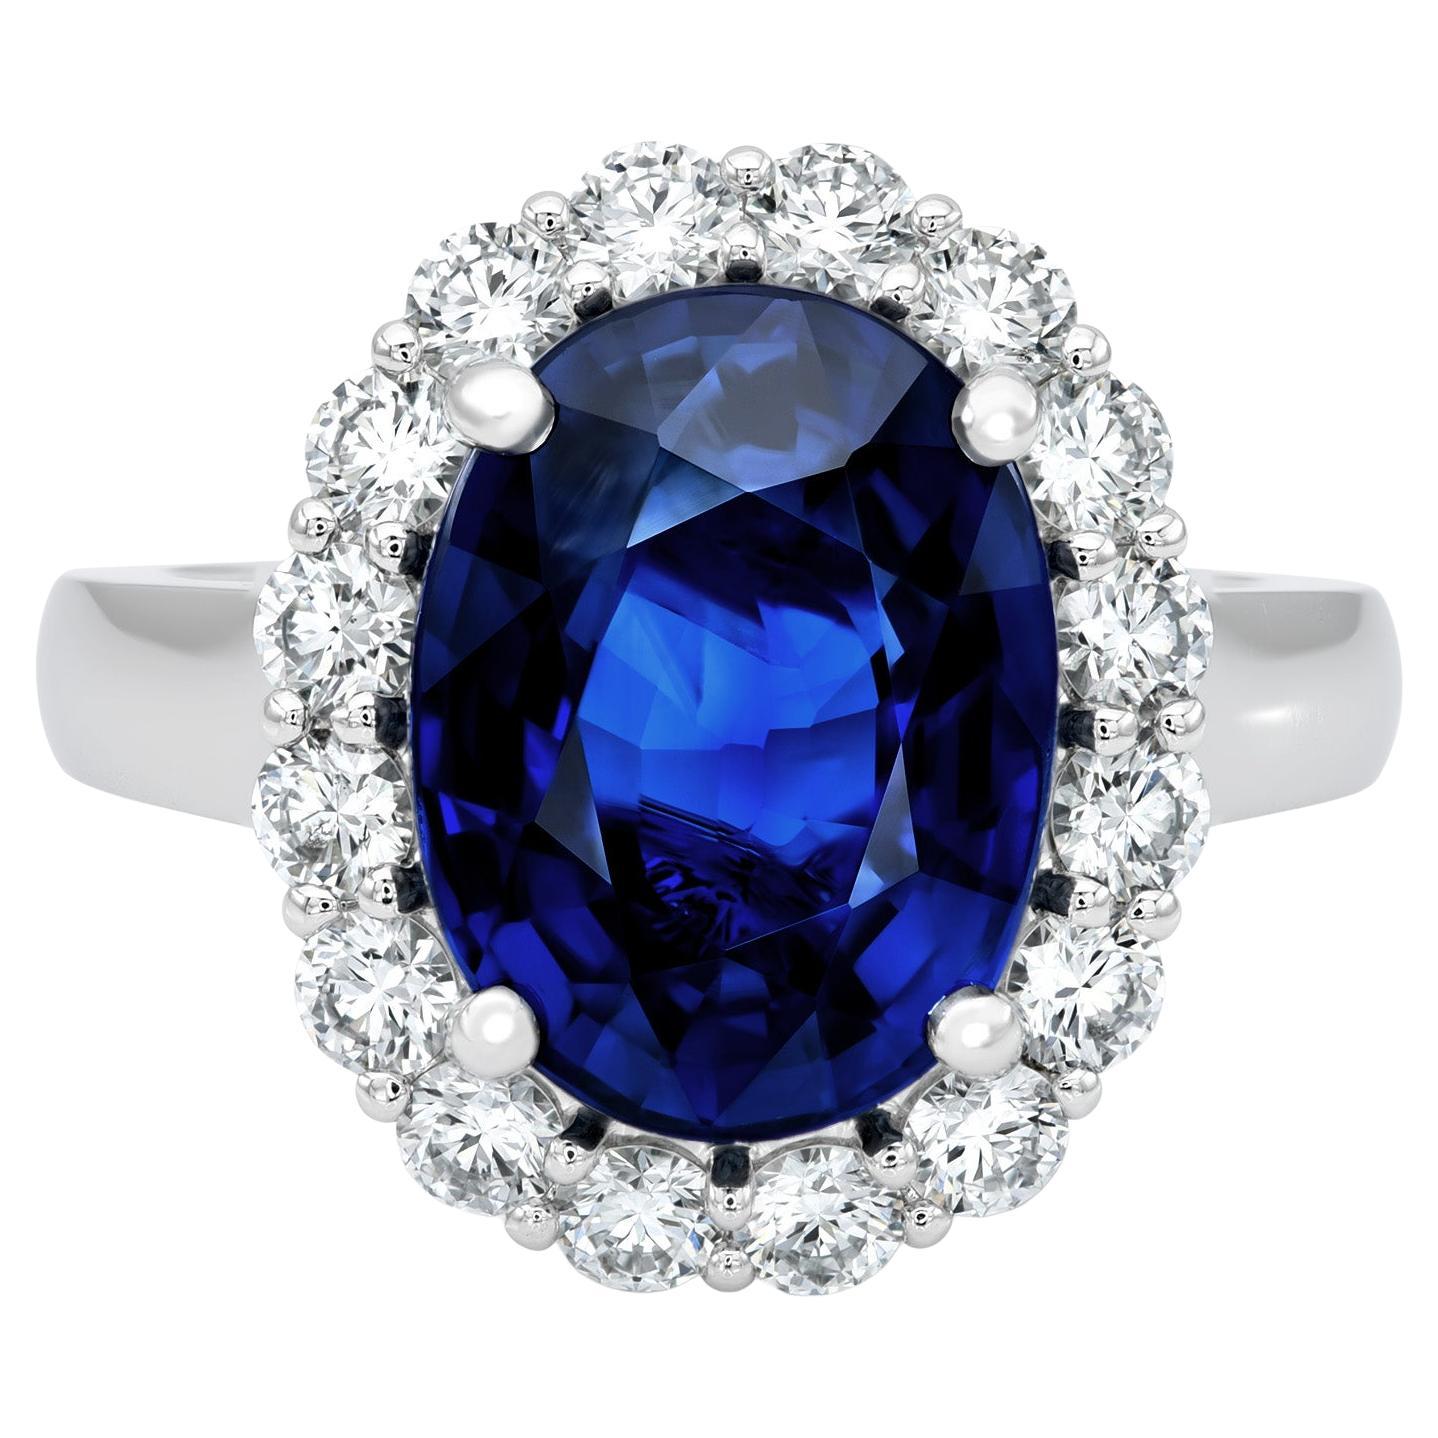 GIA Certified 7.03 carats Natural Blue Sapphire set in Platinum Diamond Ring 